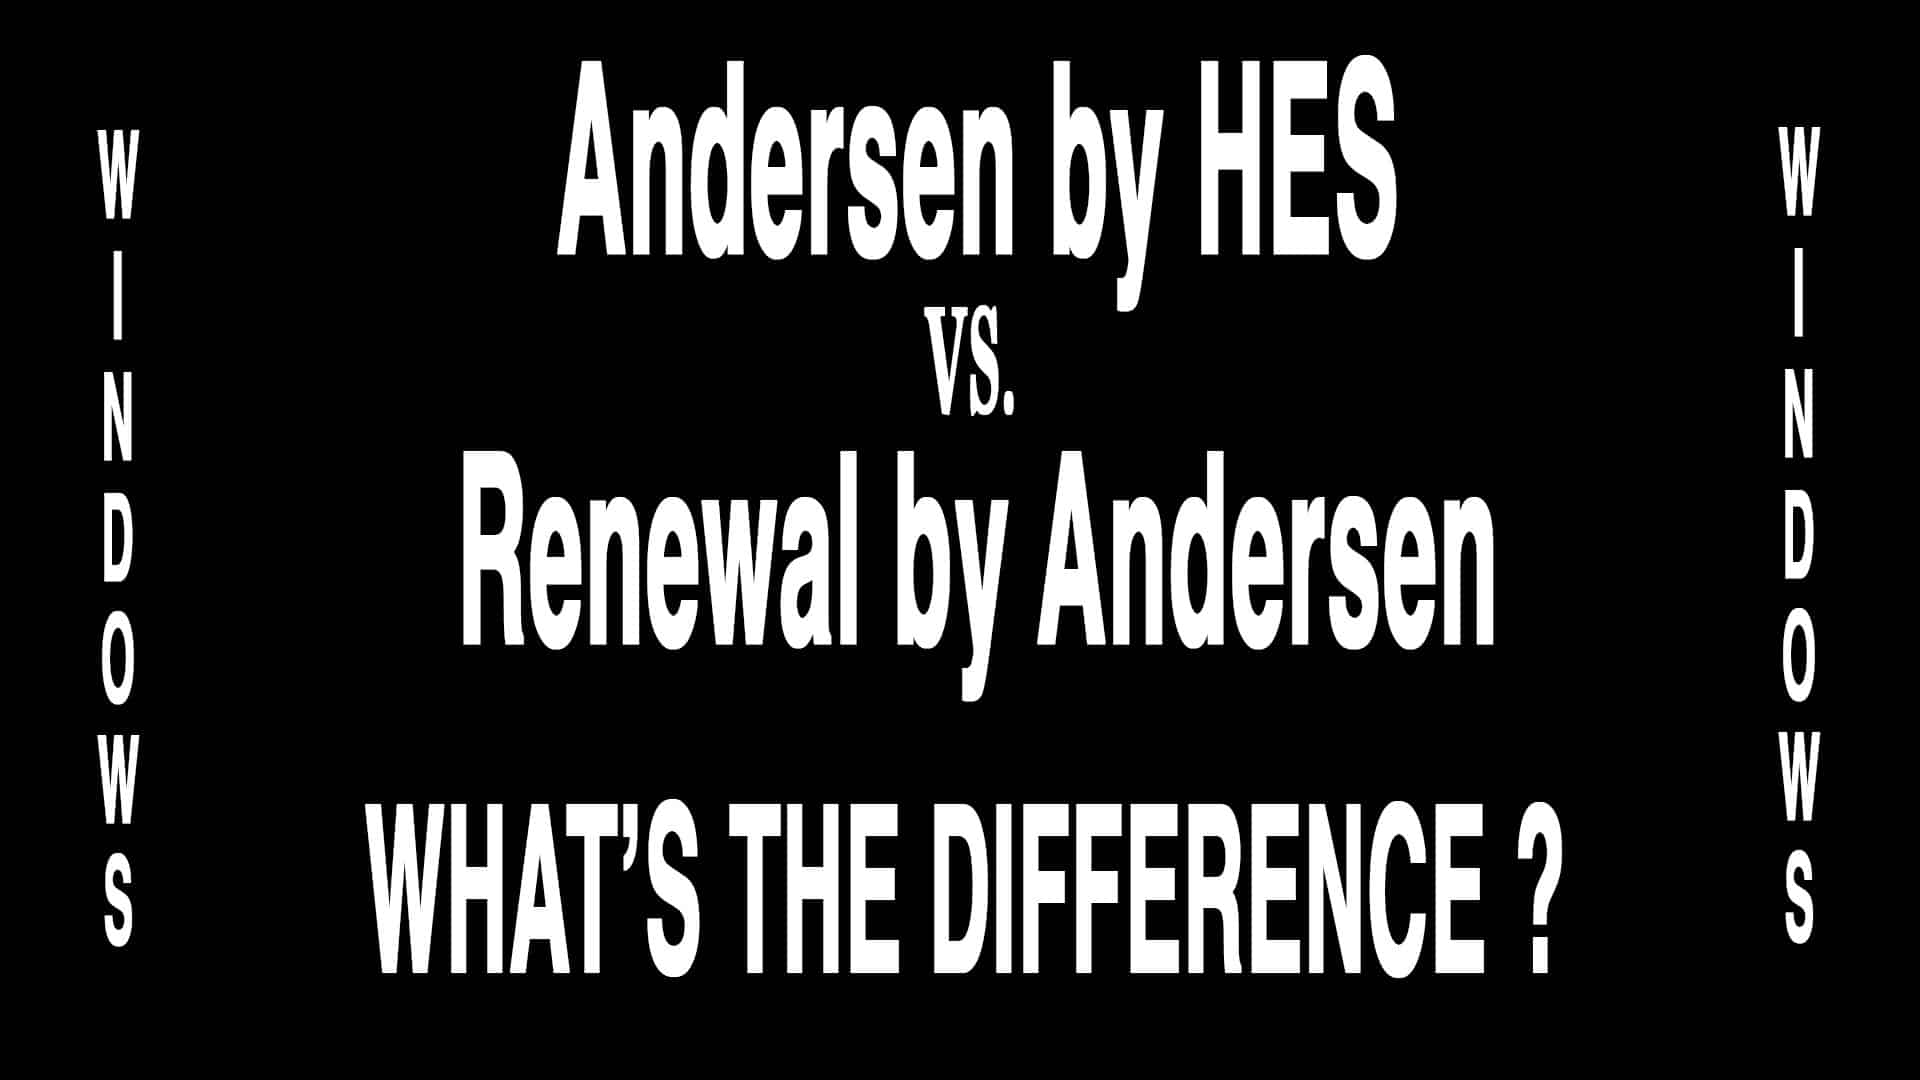 Renewal by Andersen vs Anderson by HES